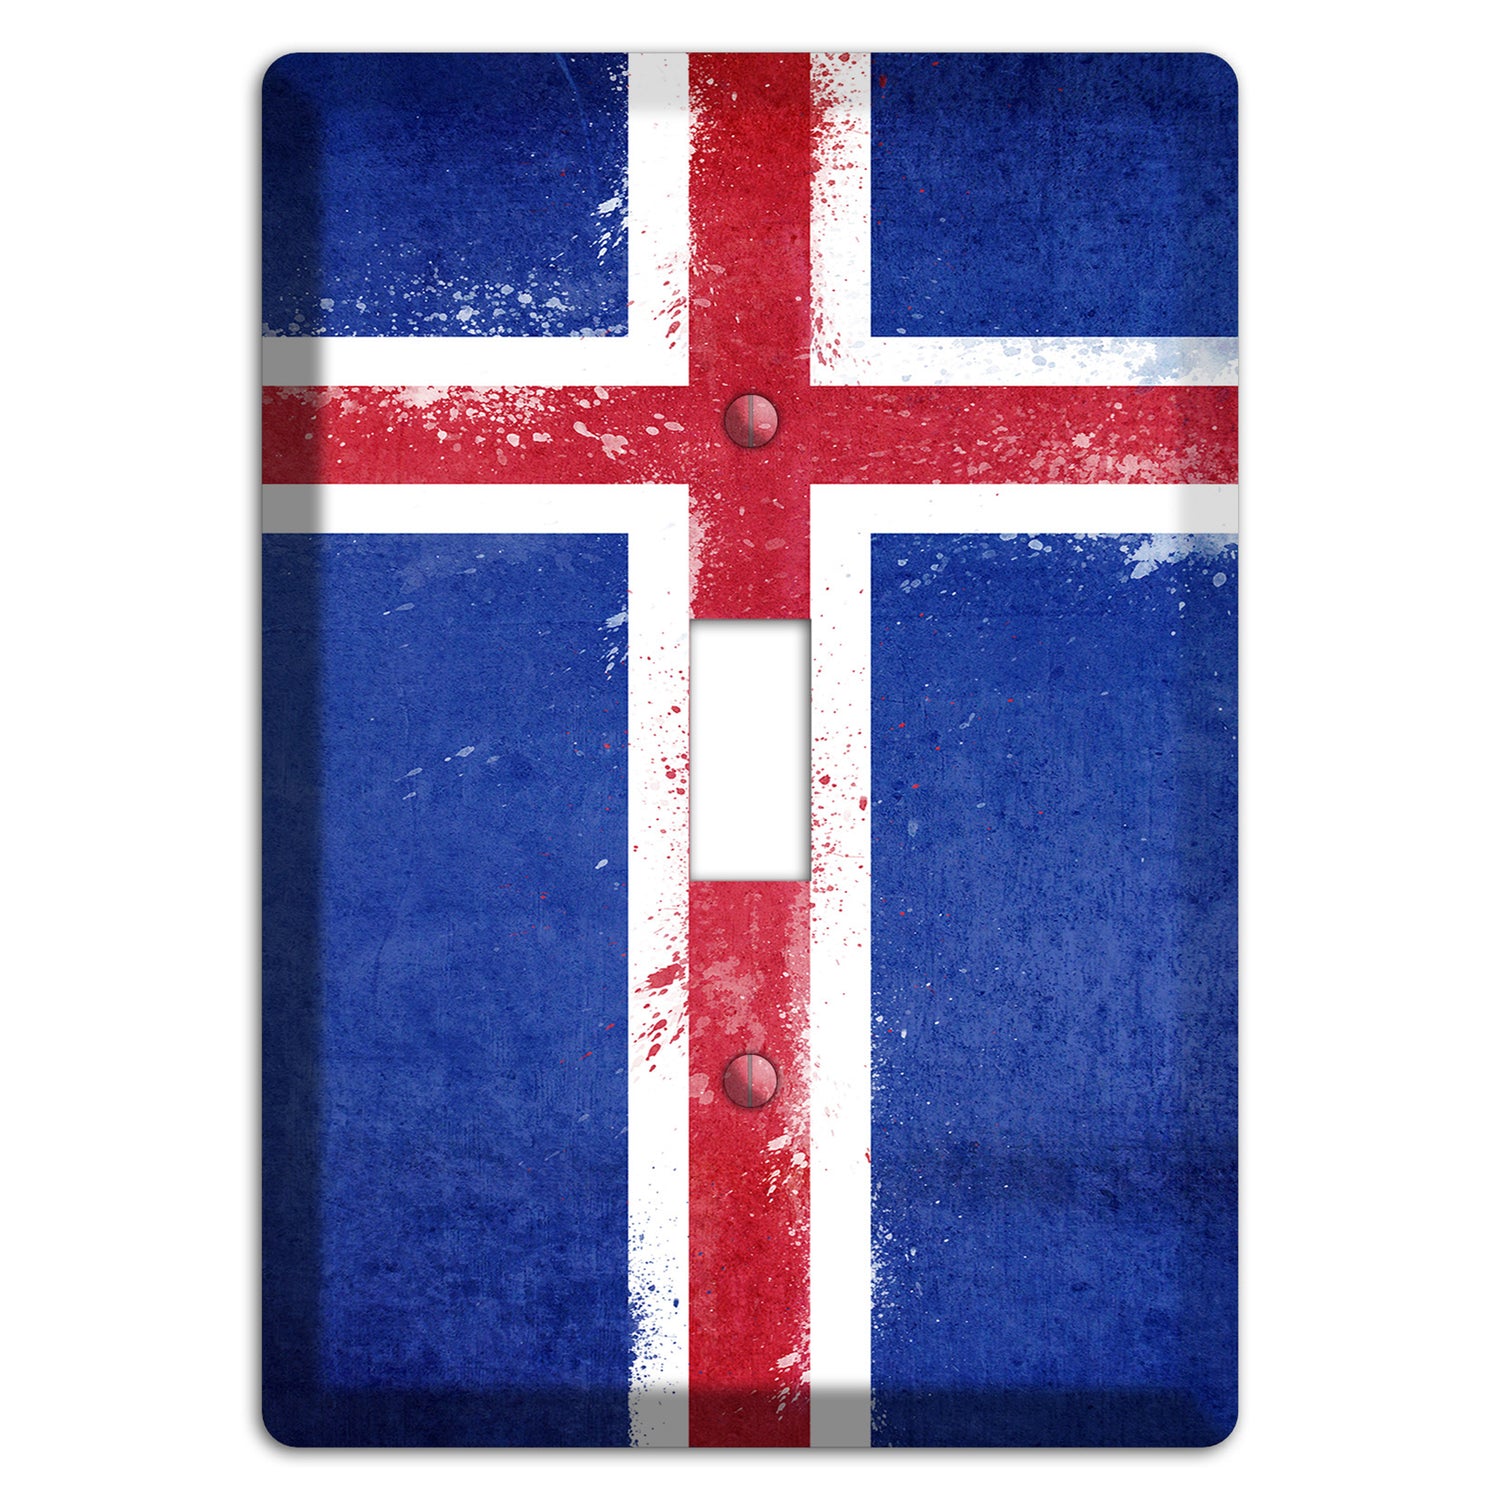 Iceland Cover Plates Cover Plates